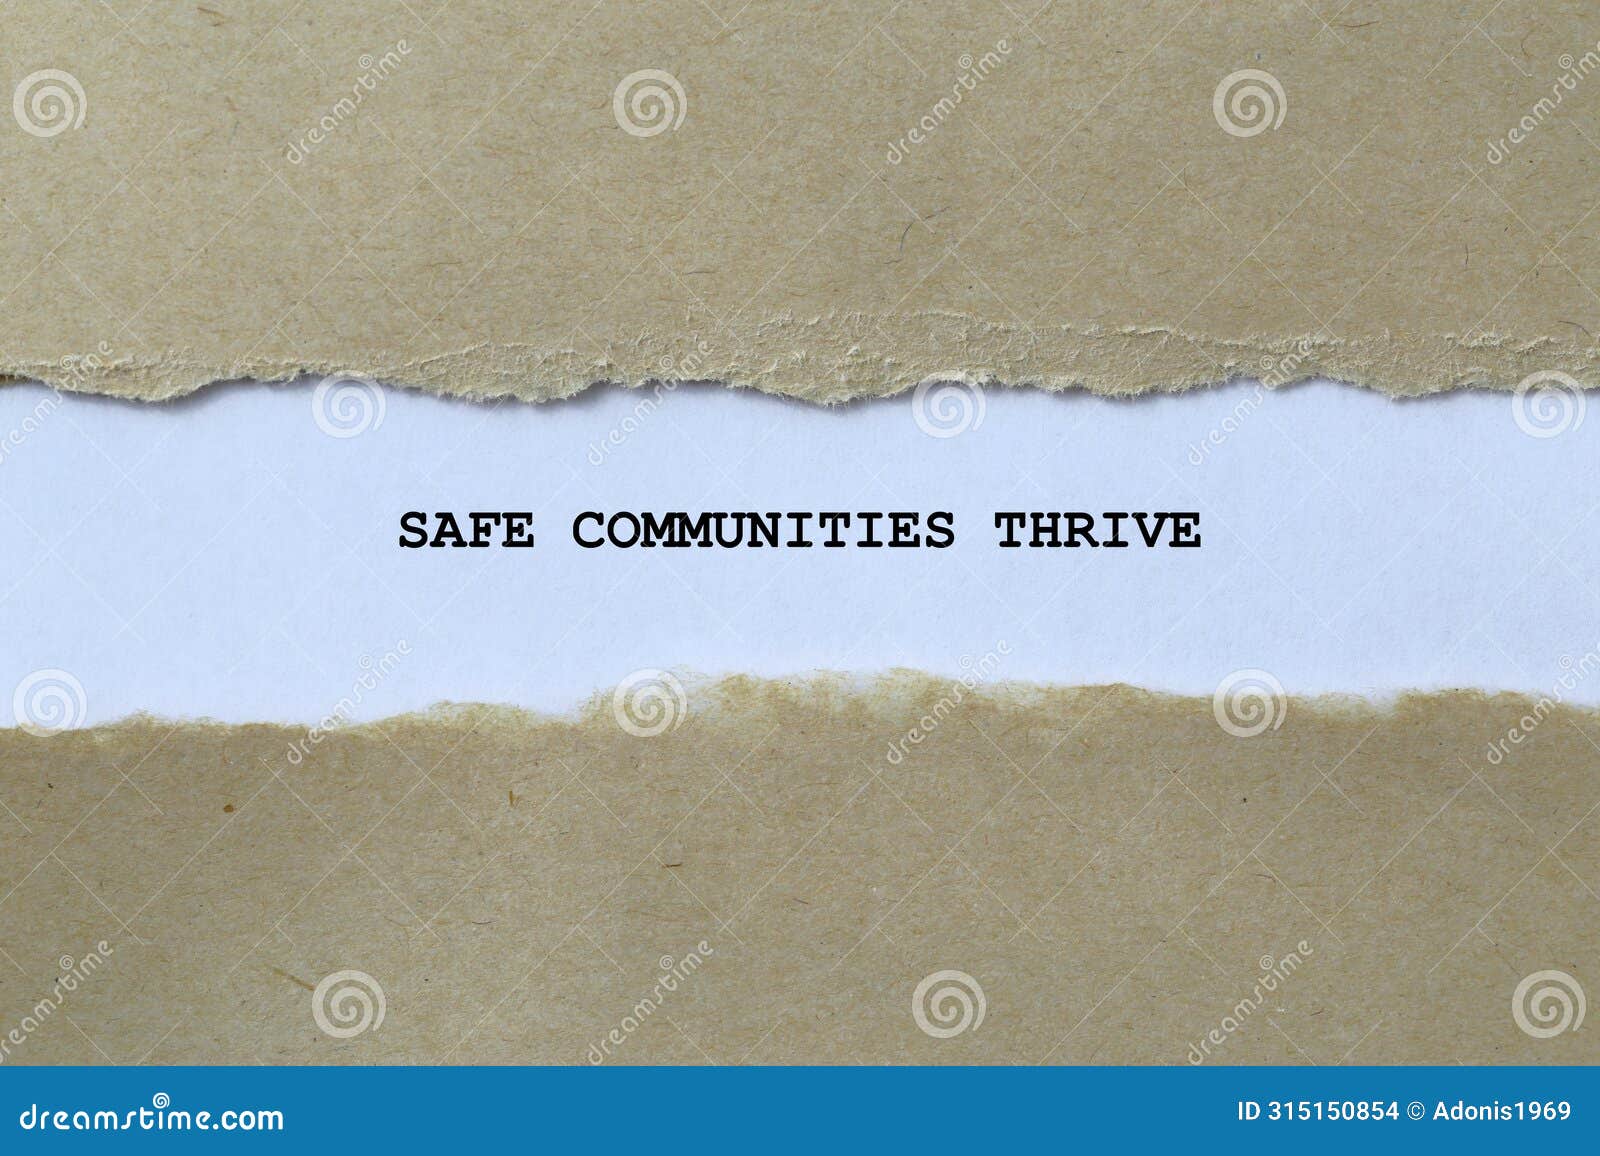 safe communities thrive on white paper